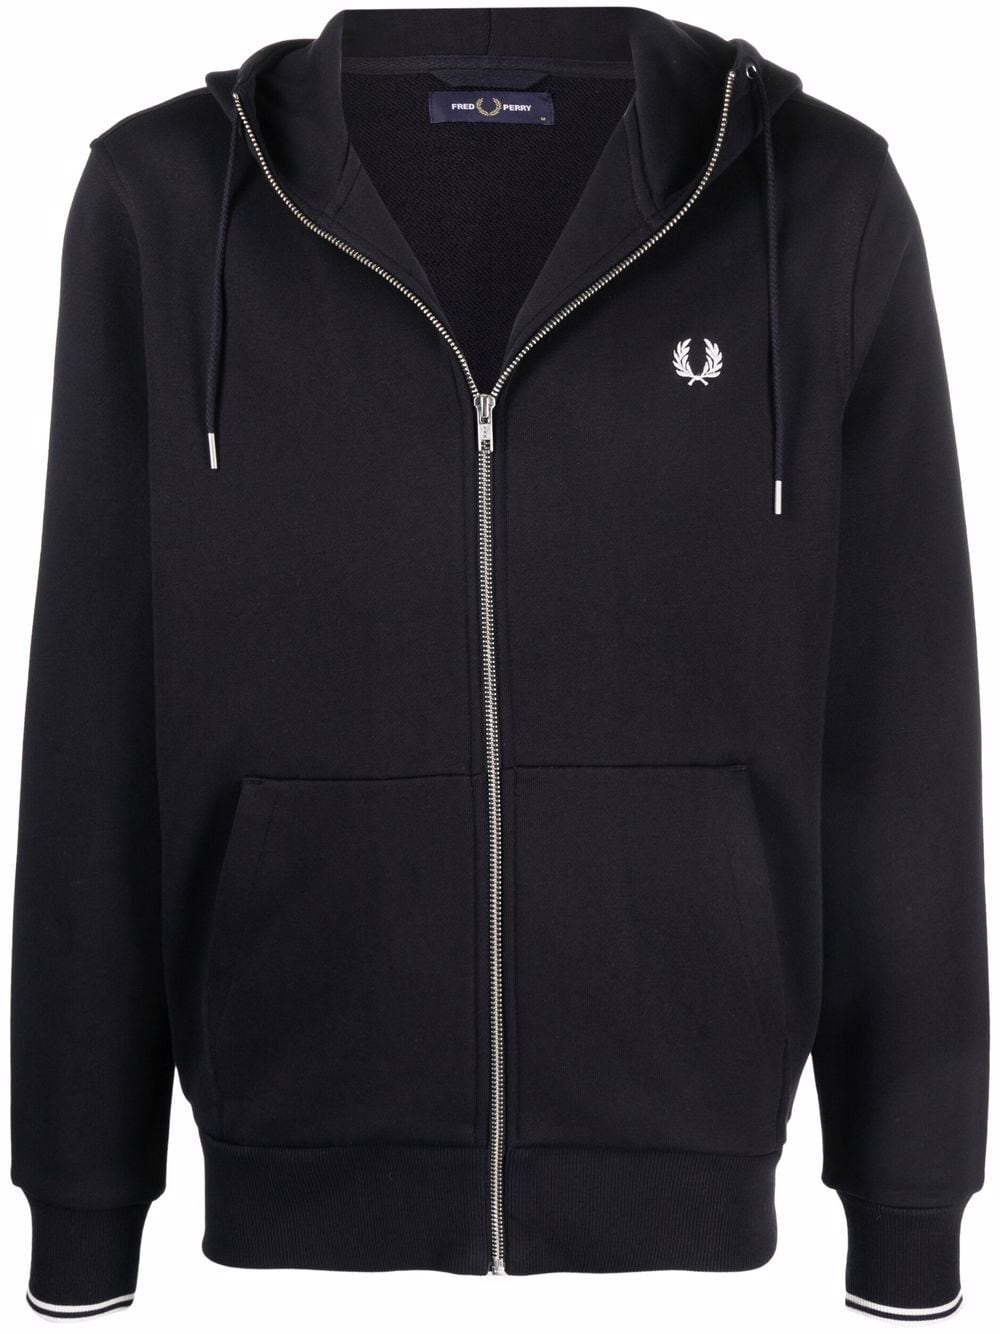 Image 1 of Fred Perry embroidered logo hoodie